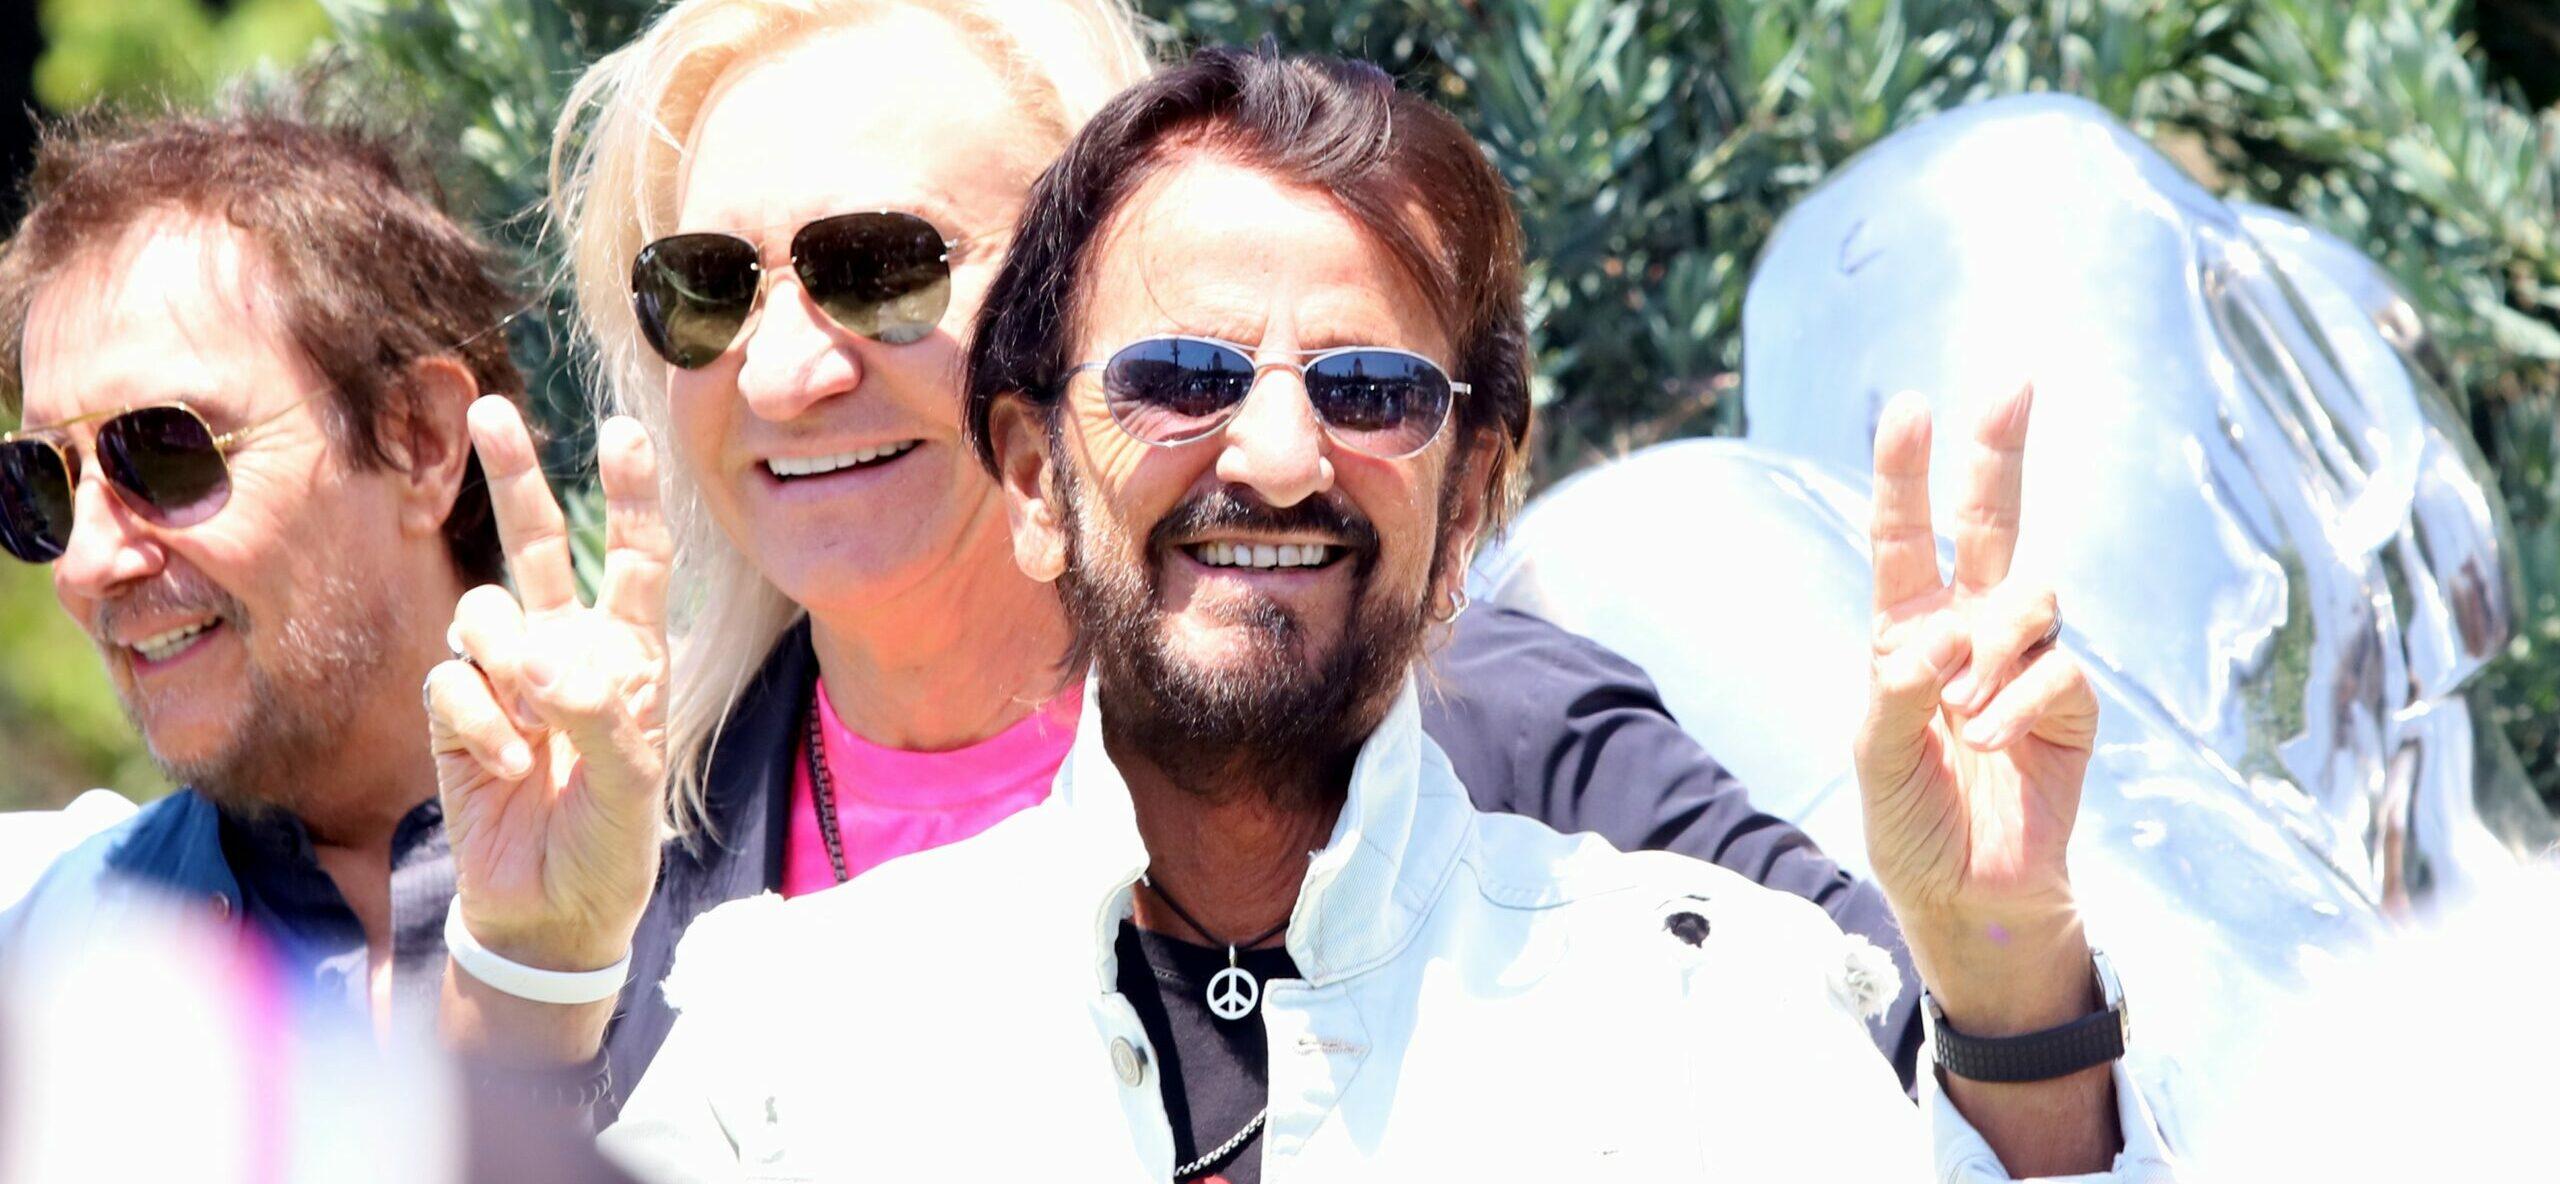 Ringo Starr celebrates his 81st birthday with a gathering and appears for his 